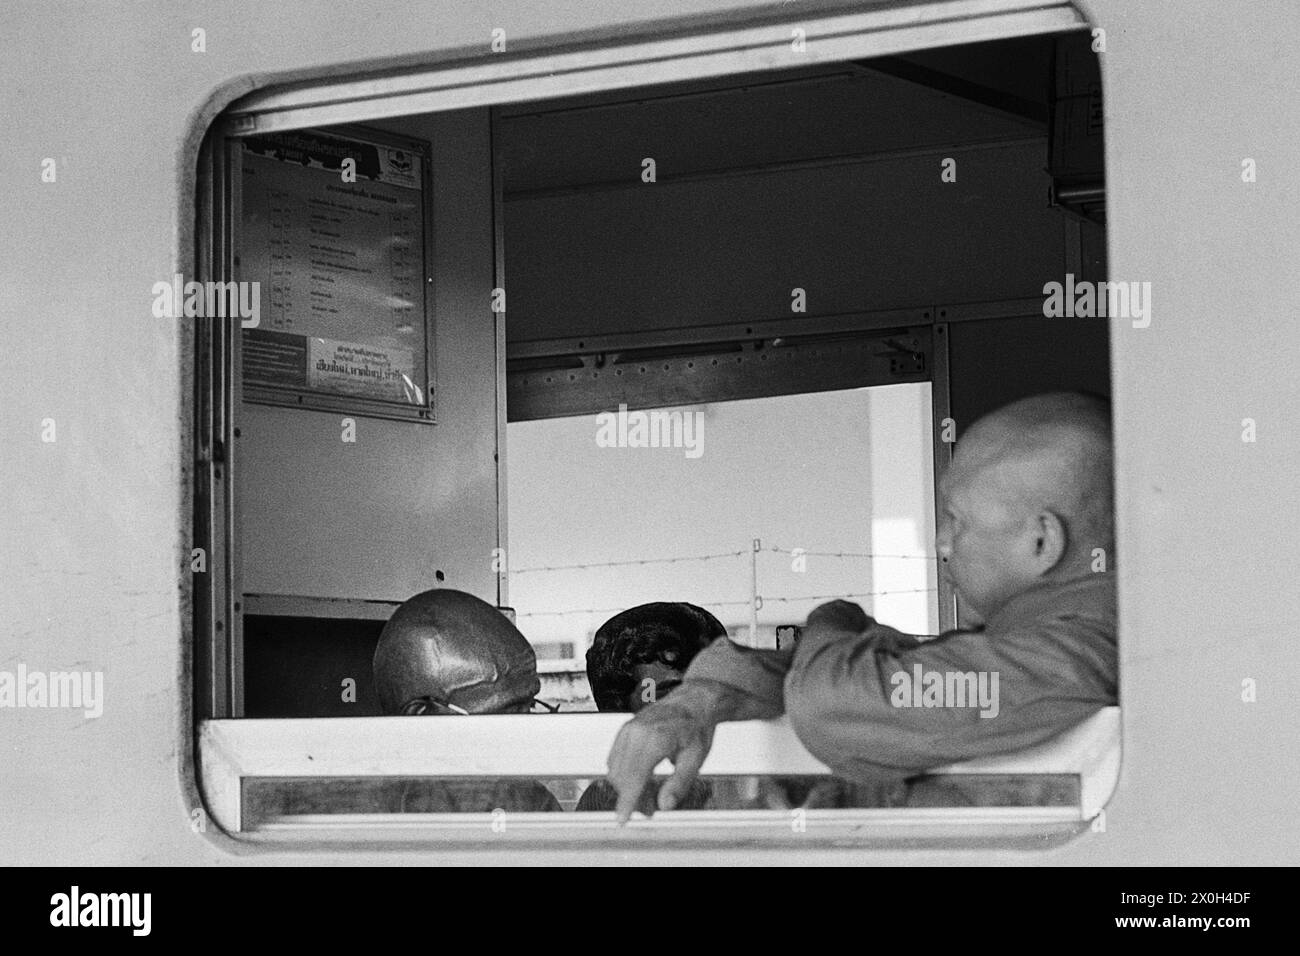 At Surat Thani station in Thailand: the senior citizens sit in the compartment with Buddhist serenity. [automated translation] Stock Photo